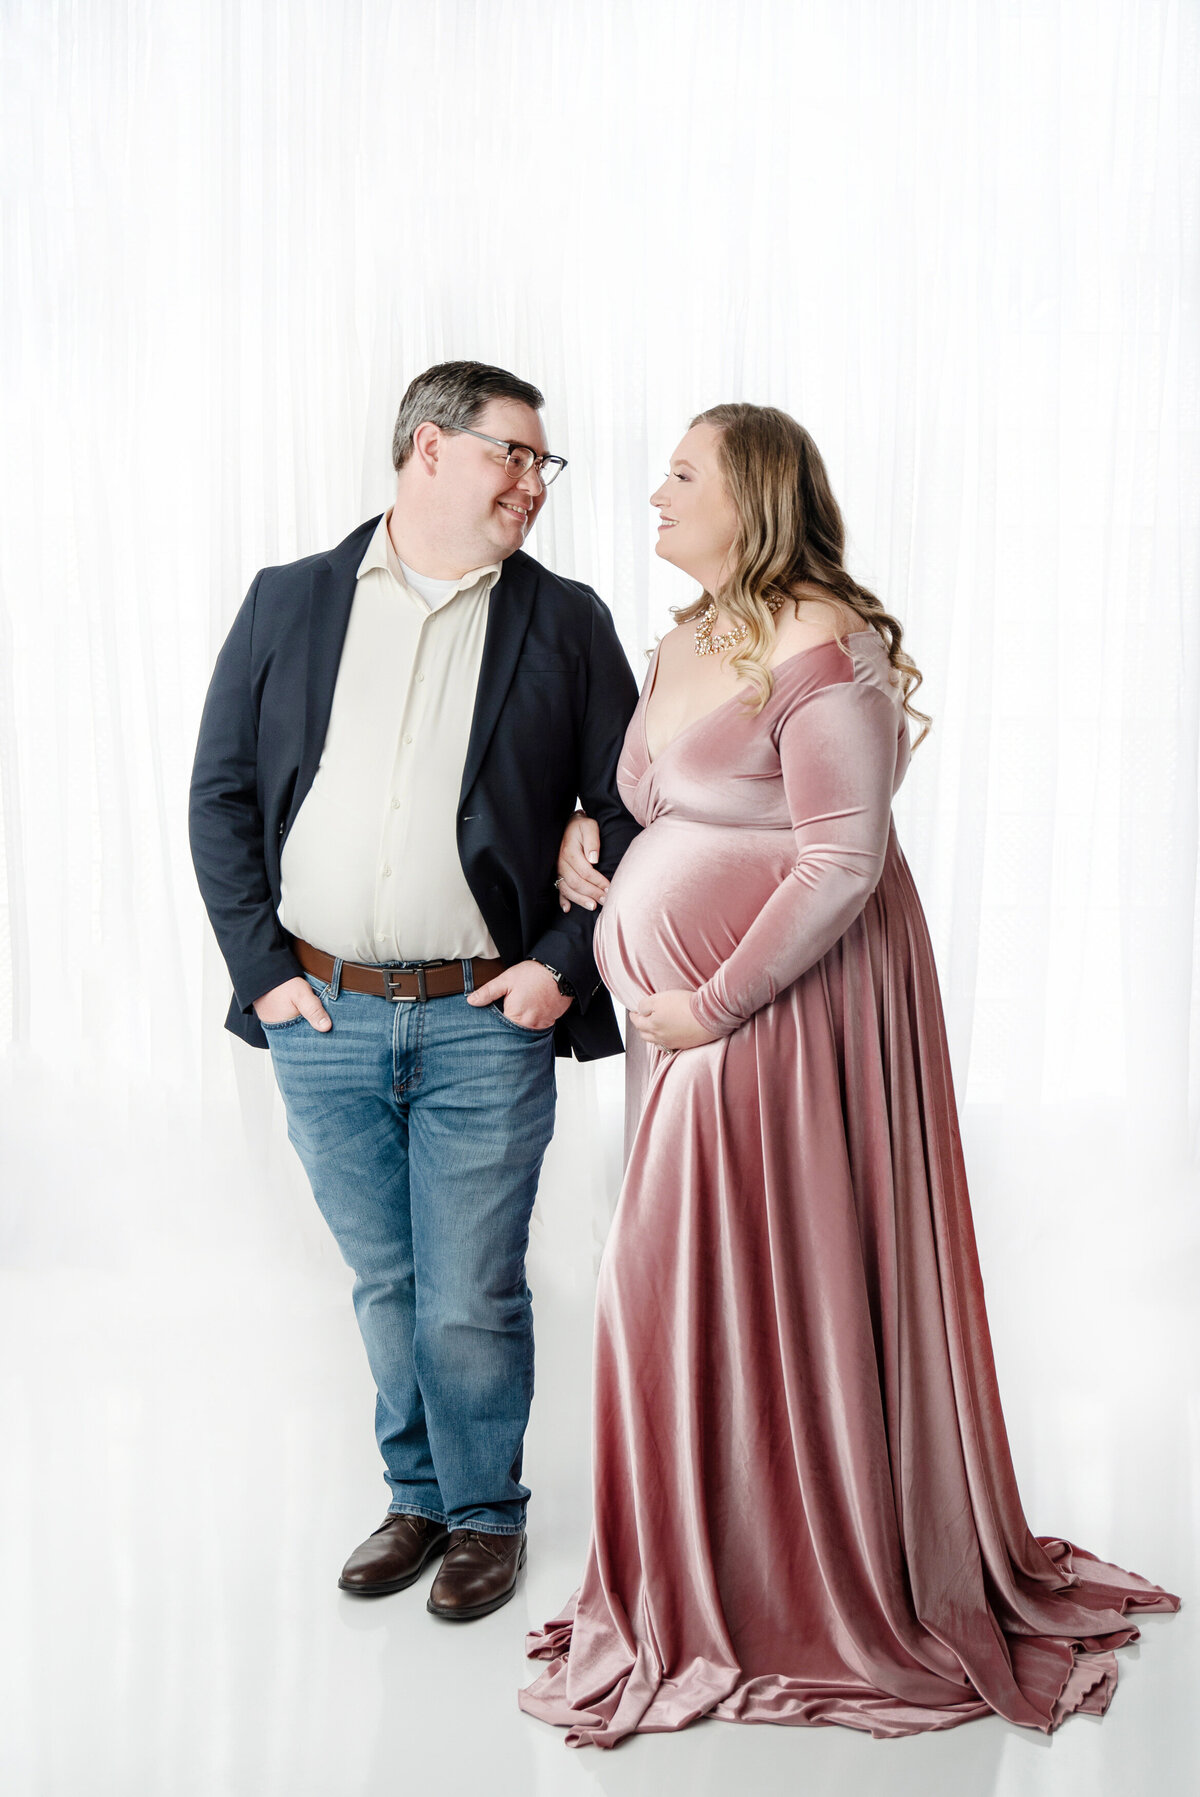 st-louis-maternity-photographer-expecting-mother-and-father-linking-arms-against-white-background-he-in-a-casual-suit-she-wearing-a-pink-velvet-gown